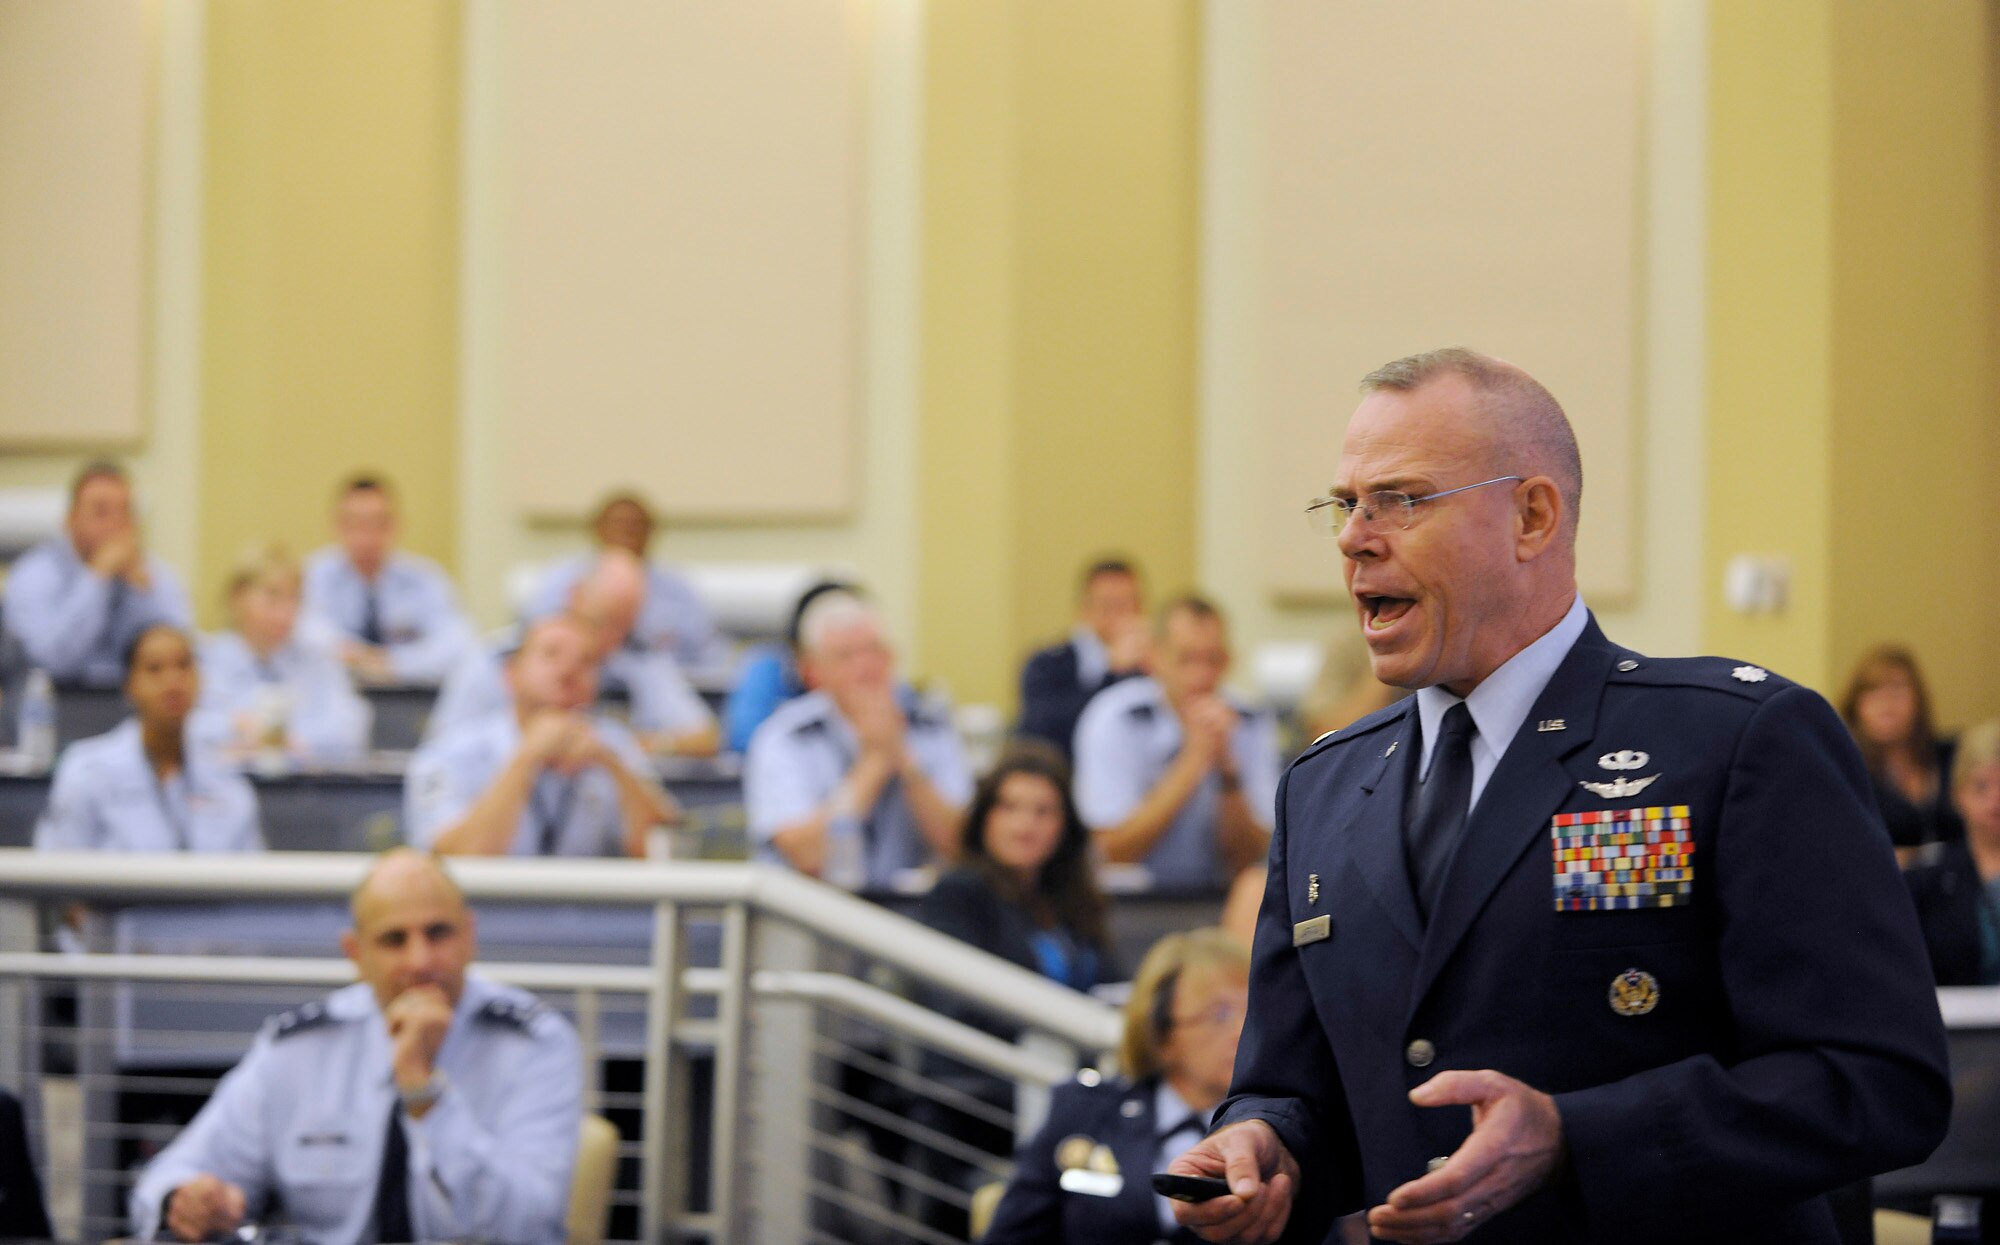 Lt. Col. Gregory Laffitte, from Air Force the Manpower, Personnel and Services directorate, provides Airmen fitness highlights at the Caring for People Forum at Joint Base Andrews, Md., on Sept. 26, 2012.  This is the fourth annual forum which provides strategies for commanders, leaders and care professionals to help Airmen and their families.  (U.S. Air Force photo/Scott M. Ash)